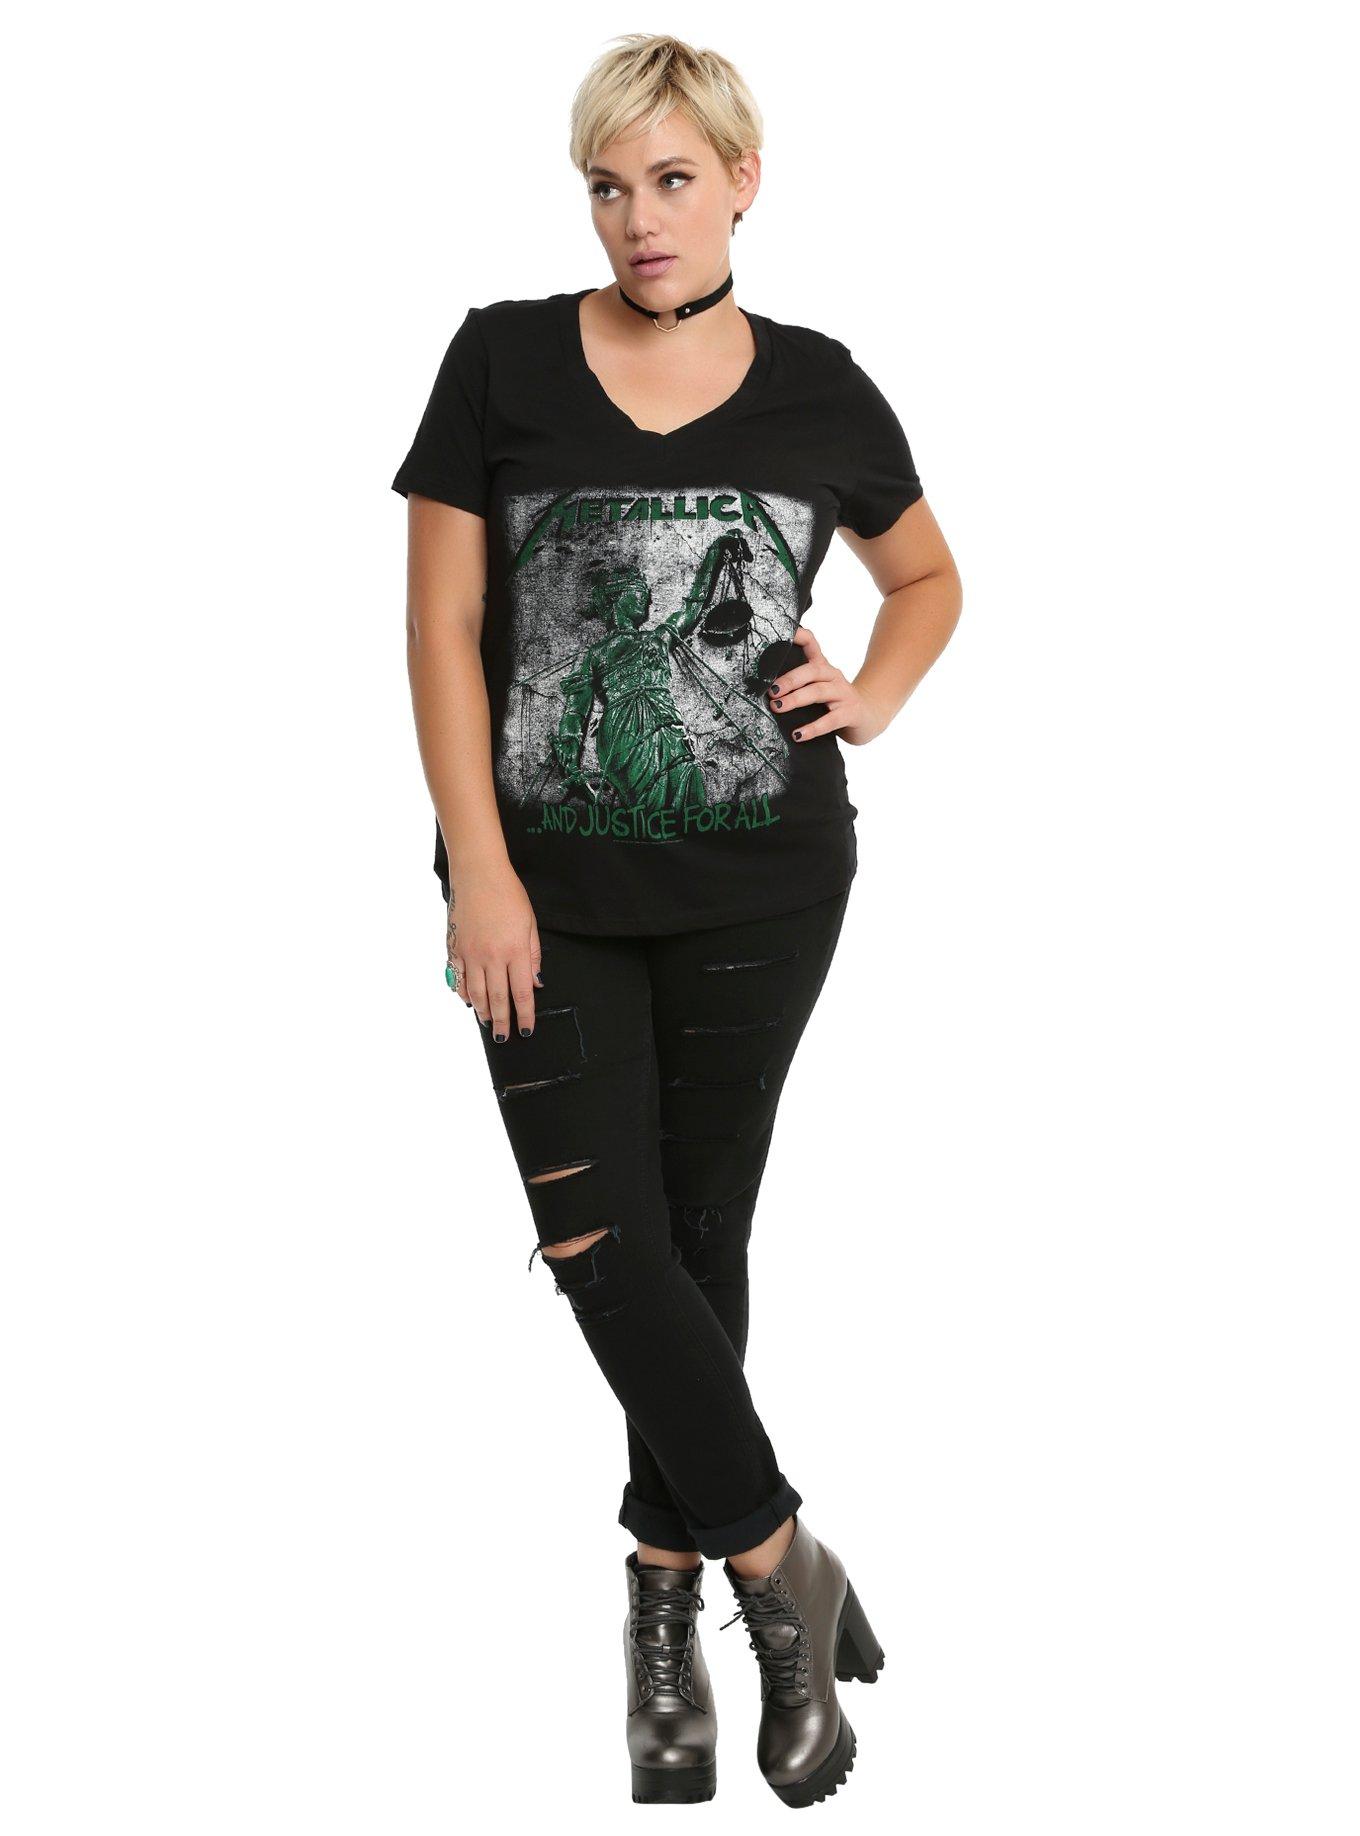 Metallica Justice For All Girls T-Shirt Plus Size, BLACK, alternate